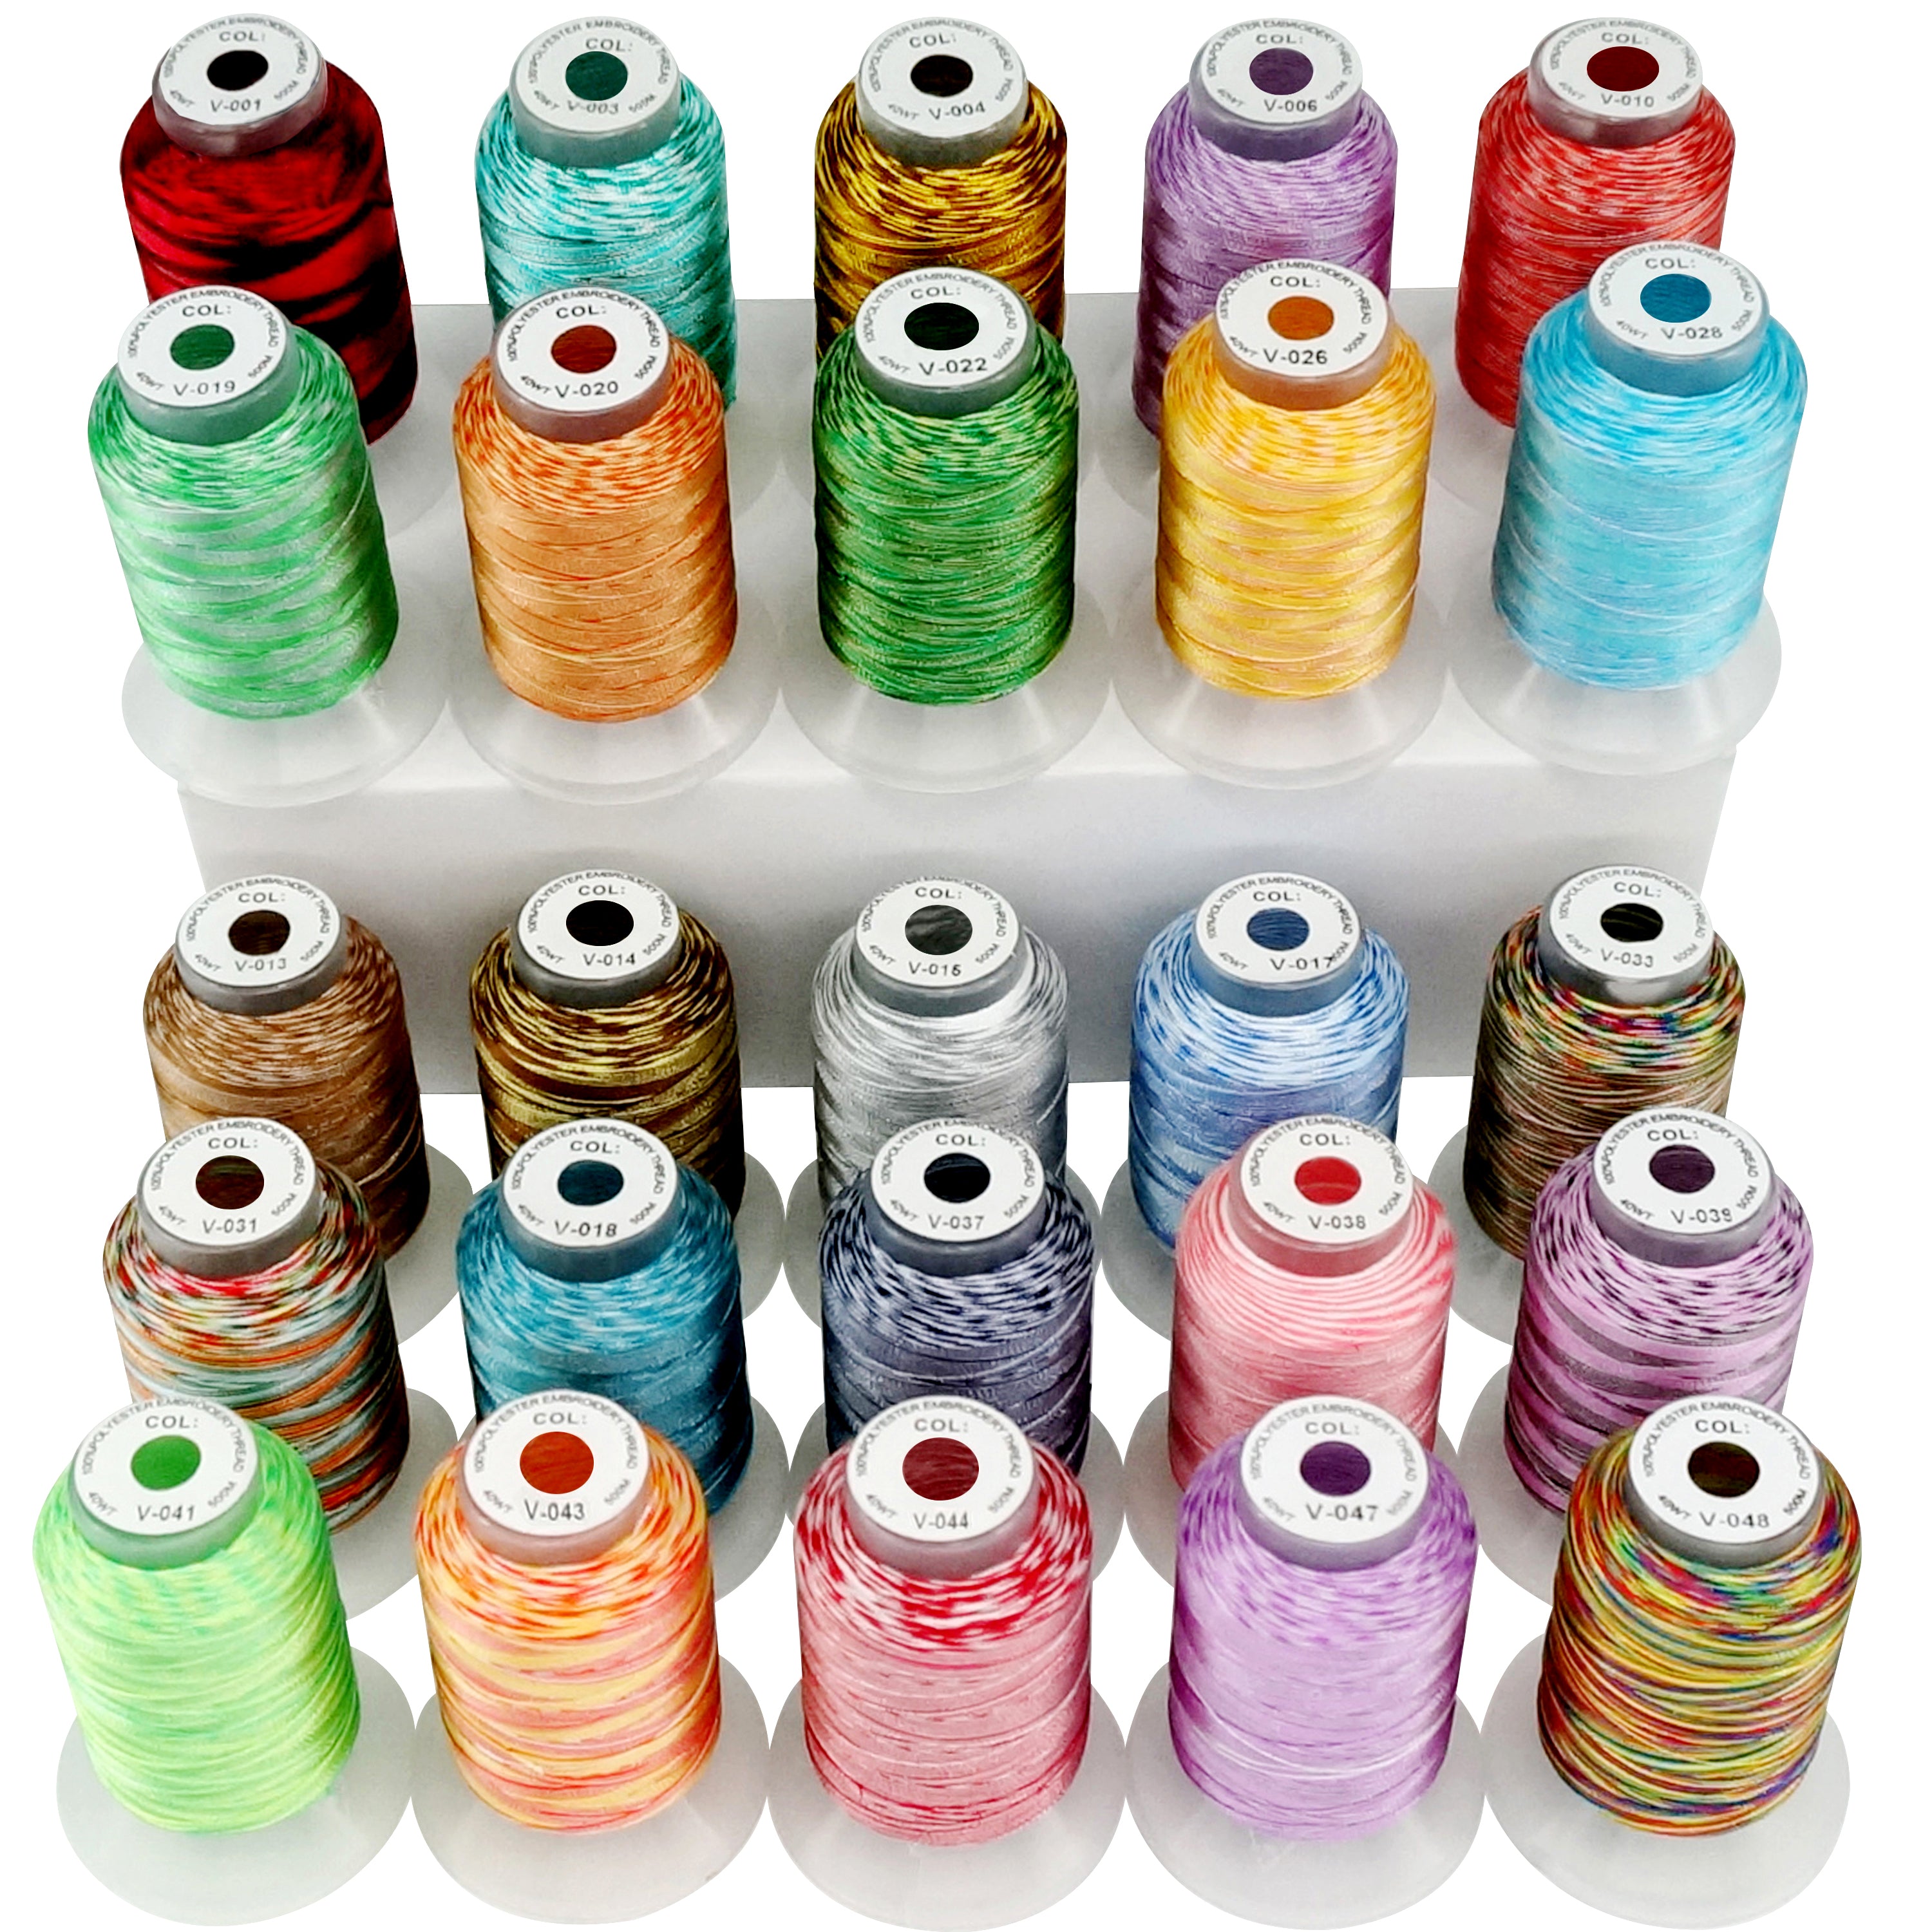 12 Colors Variegated Embroidery Thread 1000M #2